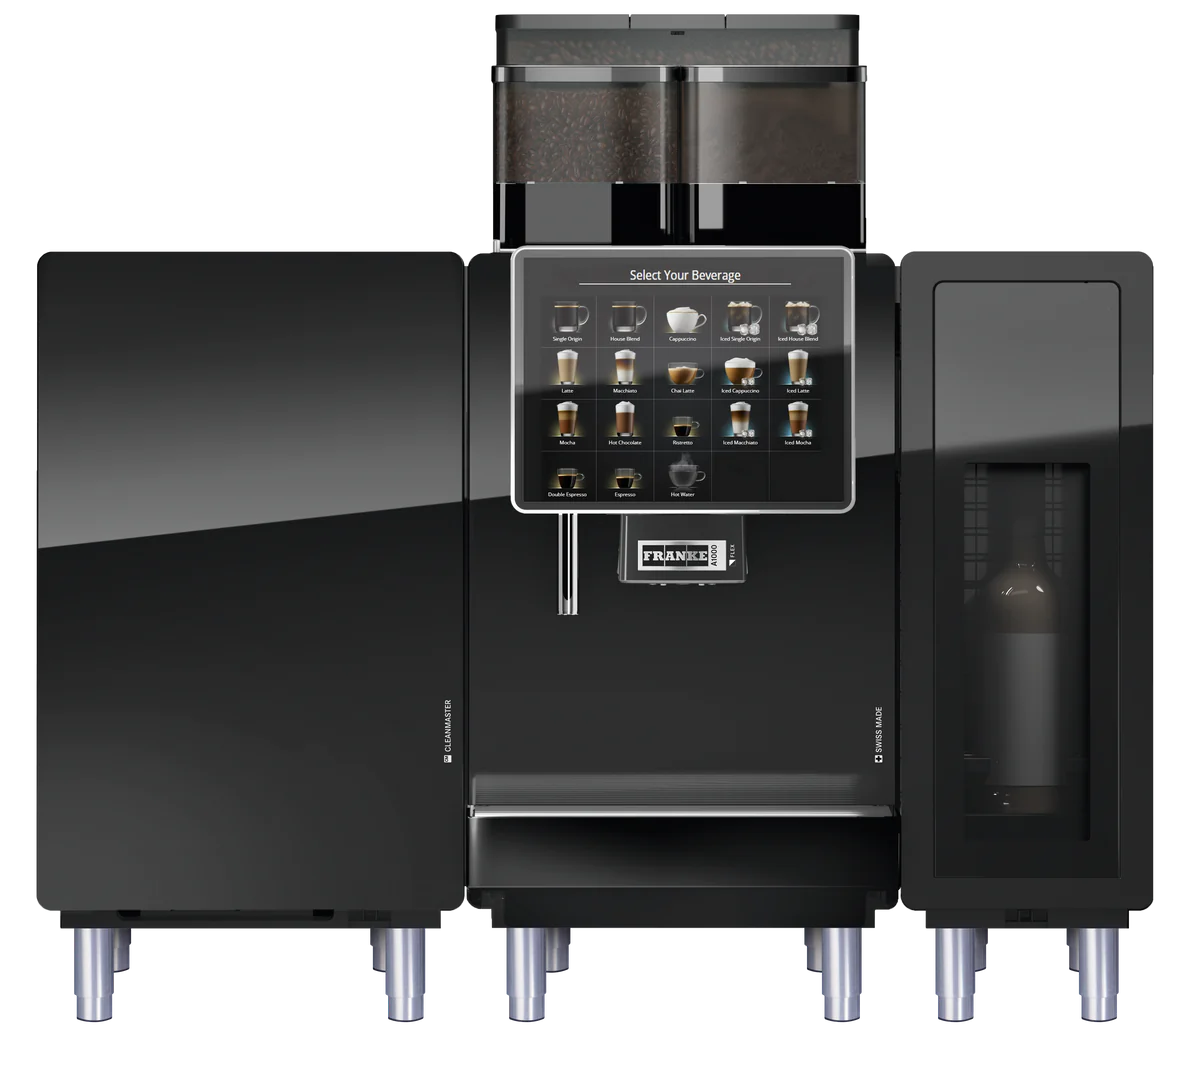 5 of the Best Commercial Coffee Machines